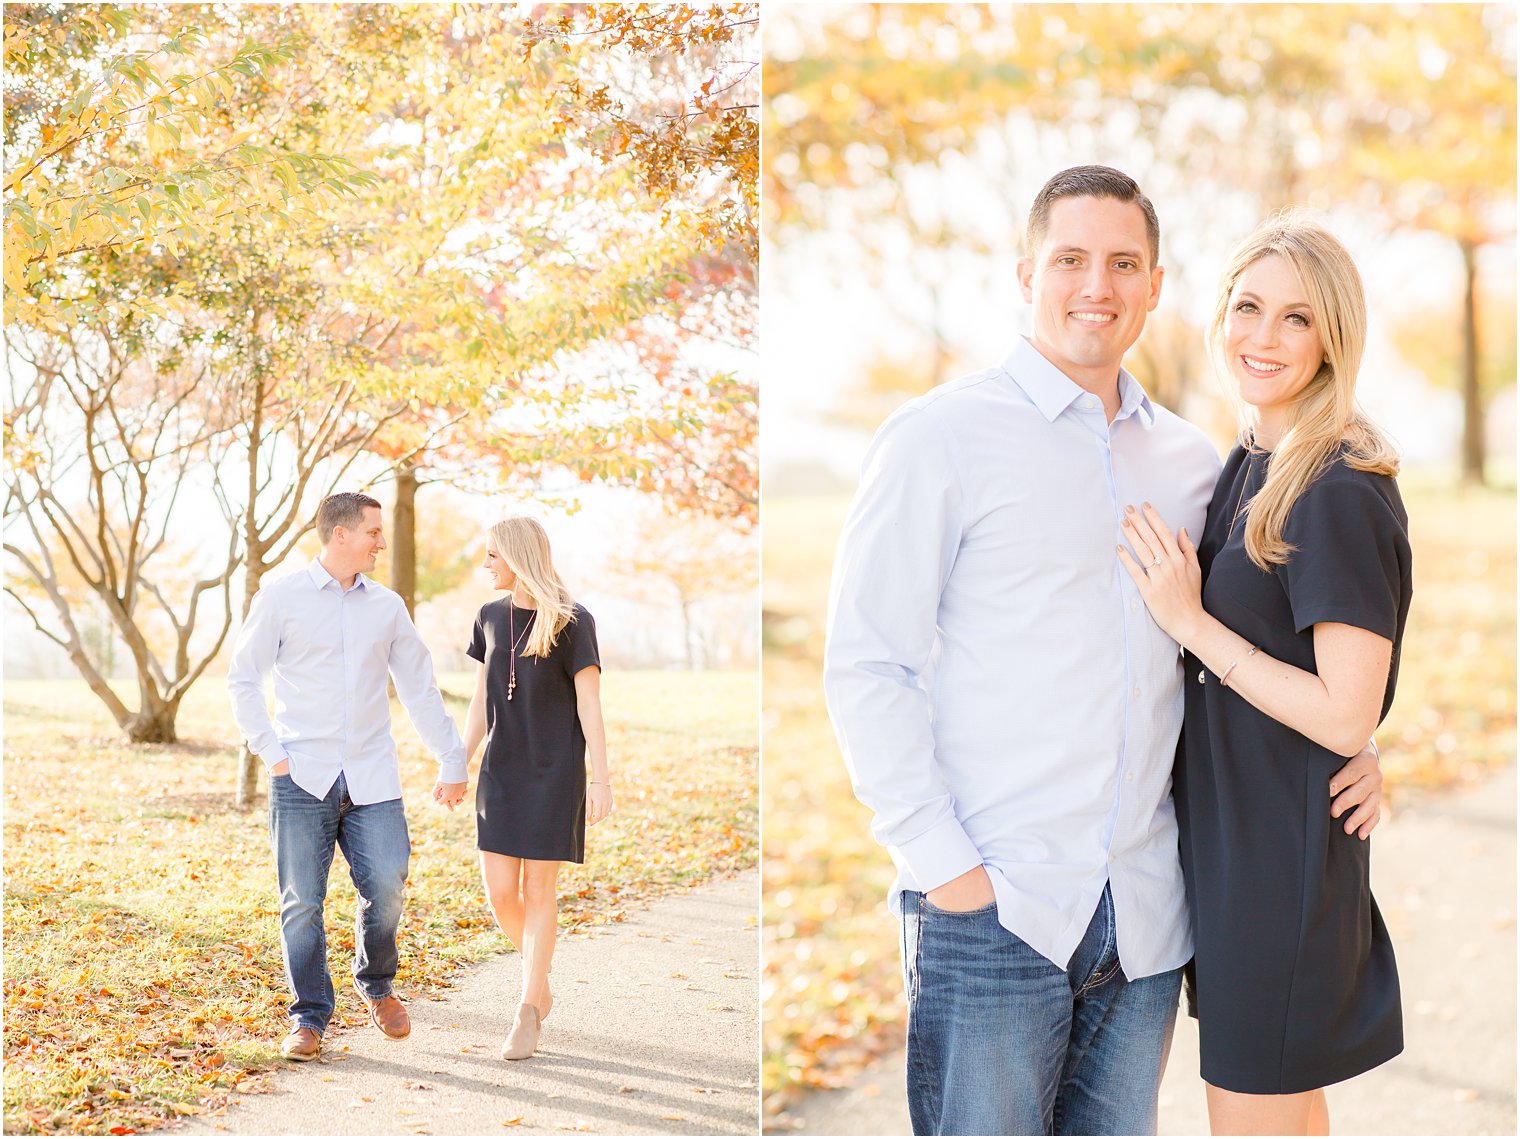 Liberty State Park Engagement Session with fall foliage